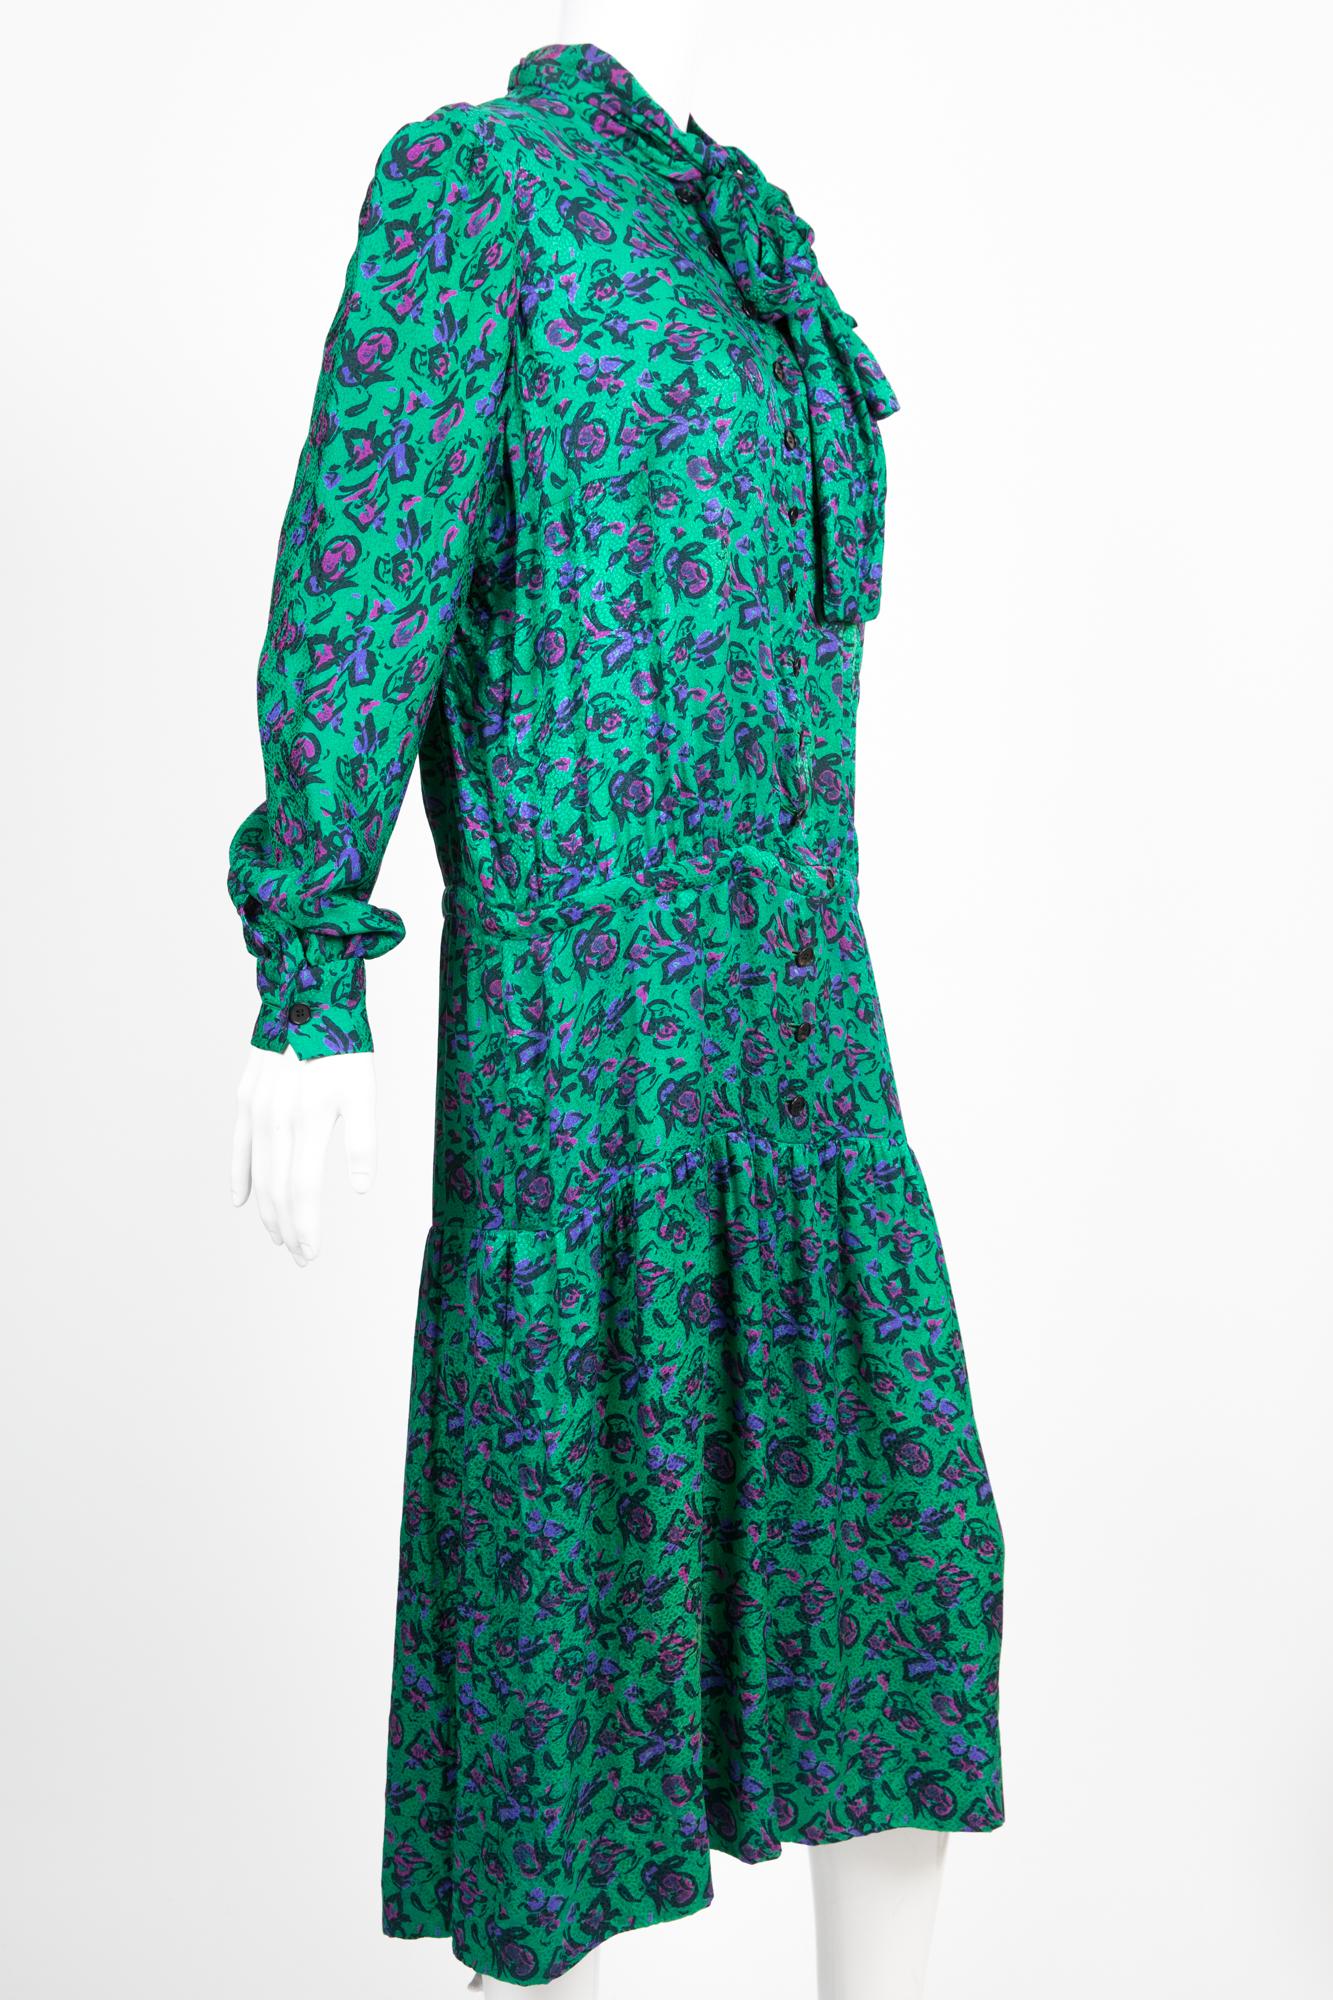 Lanvin Haute Couture dress featuring a front button down closure down chest, a lavalliere tie closure at neckline, a green silk jacquard ground with a floral print.
Composition: 100% silk
Circa 1975 Numbered Piece: 1386CB by Jules François